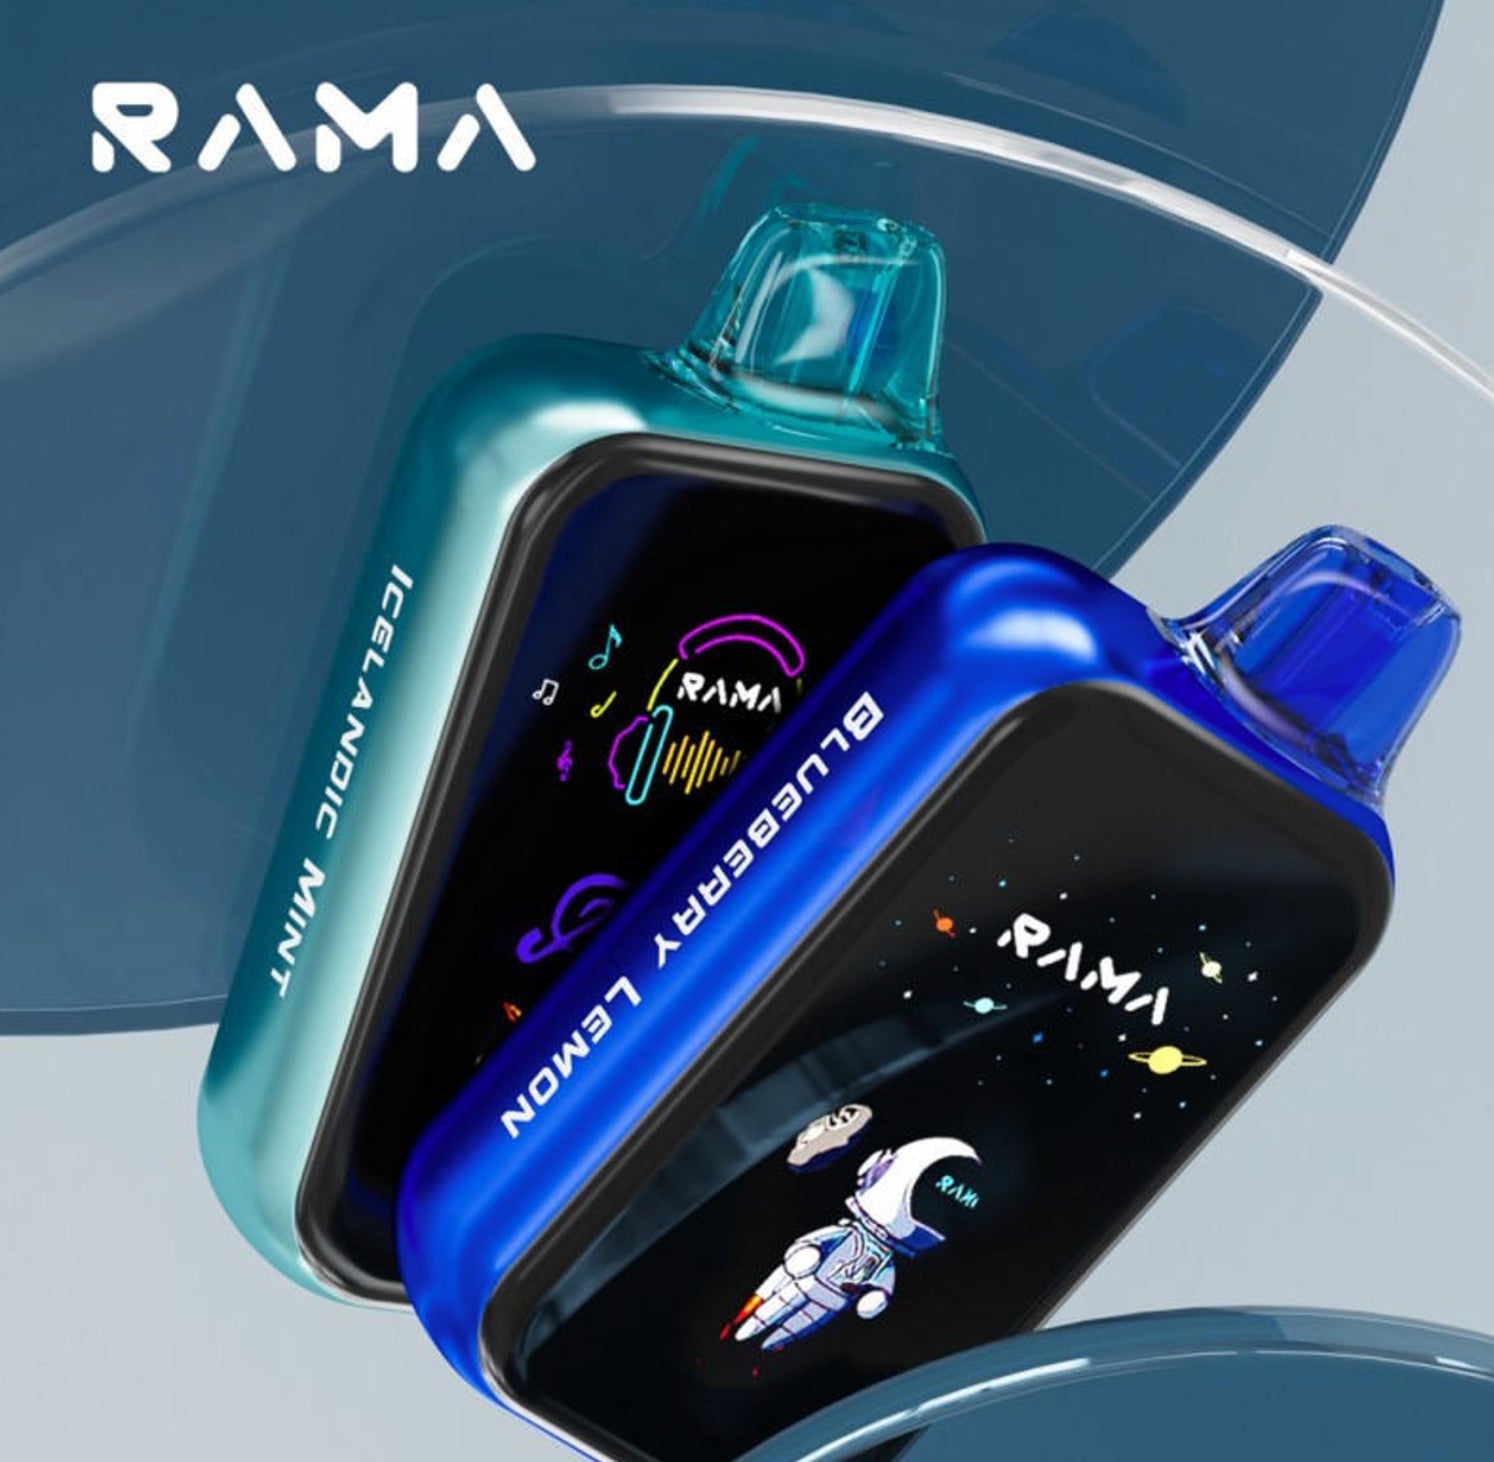 How to Connect Yout RAMA Vape to Your Phone?